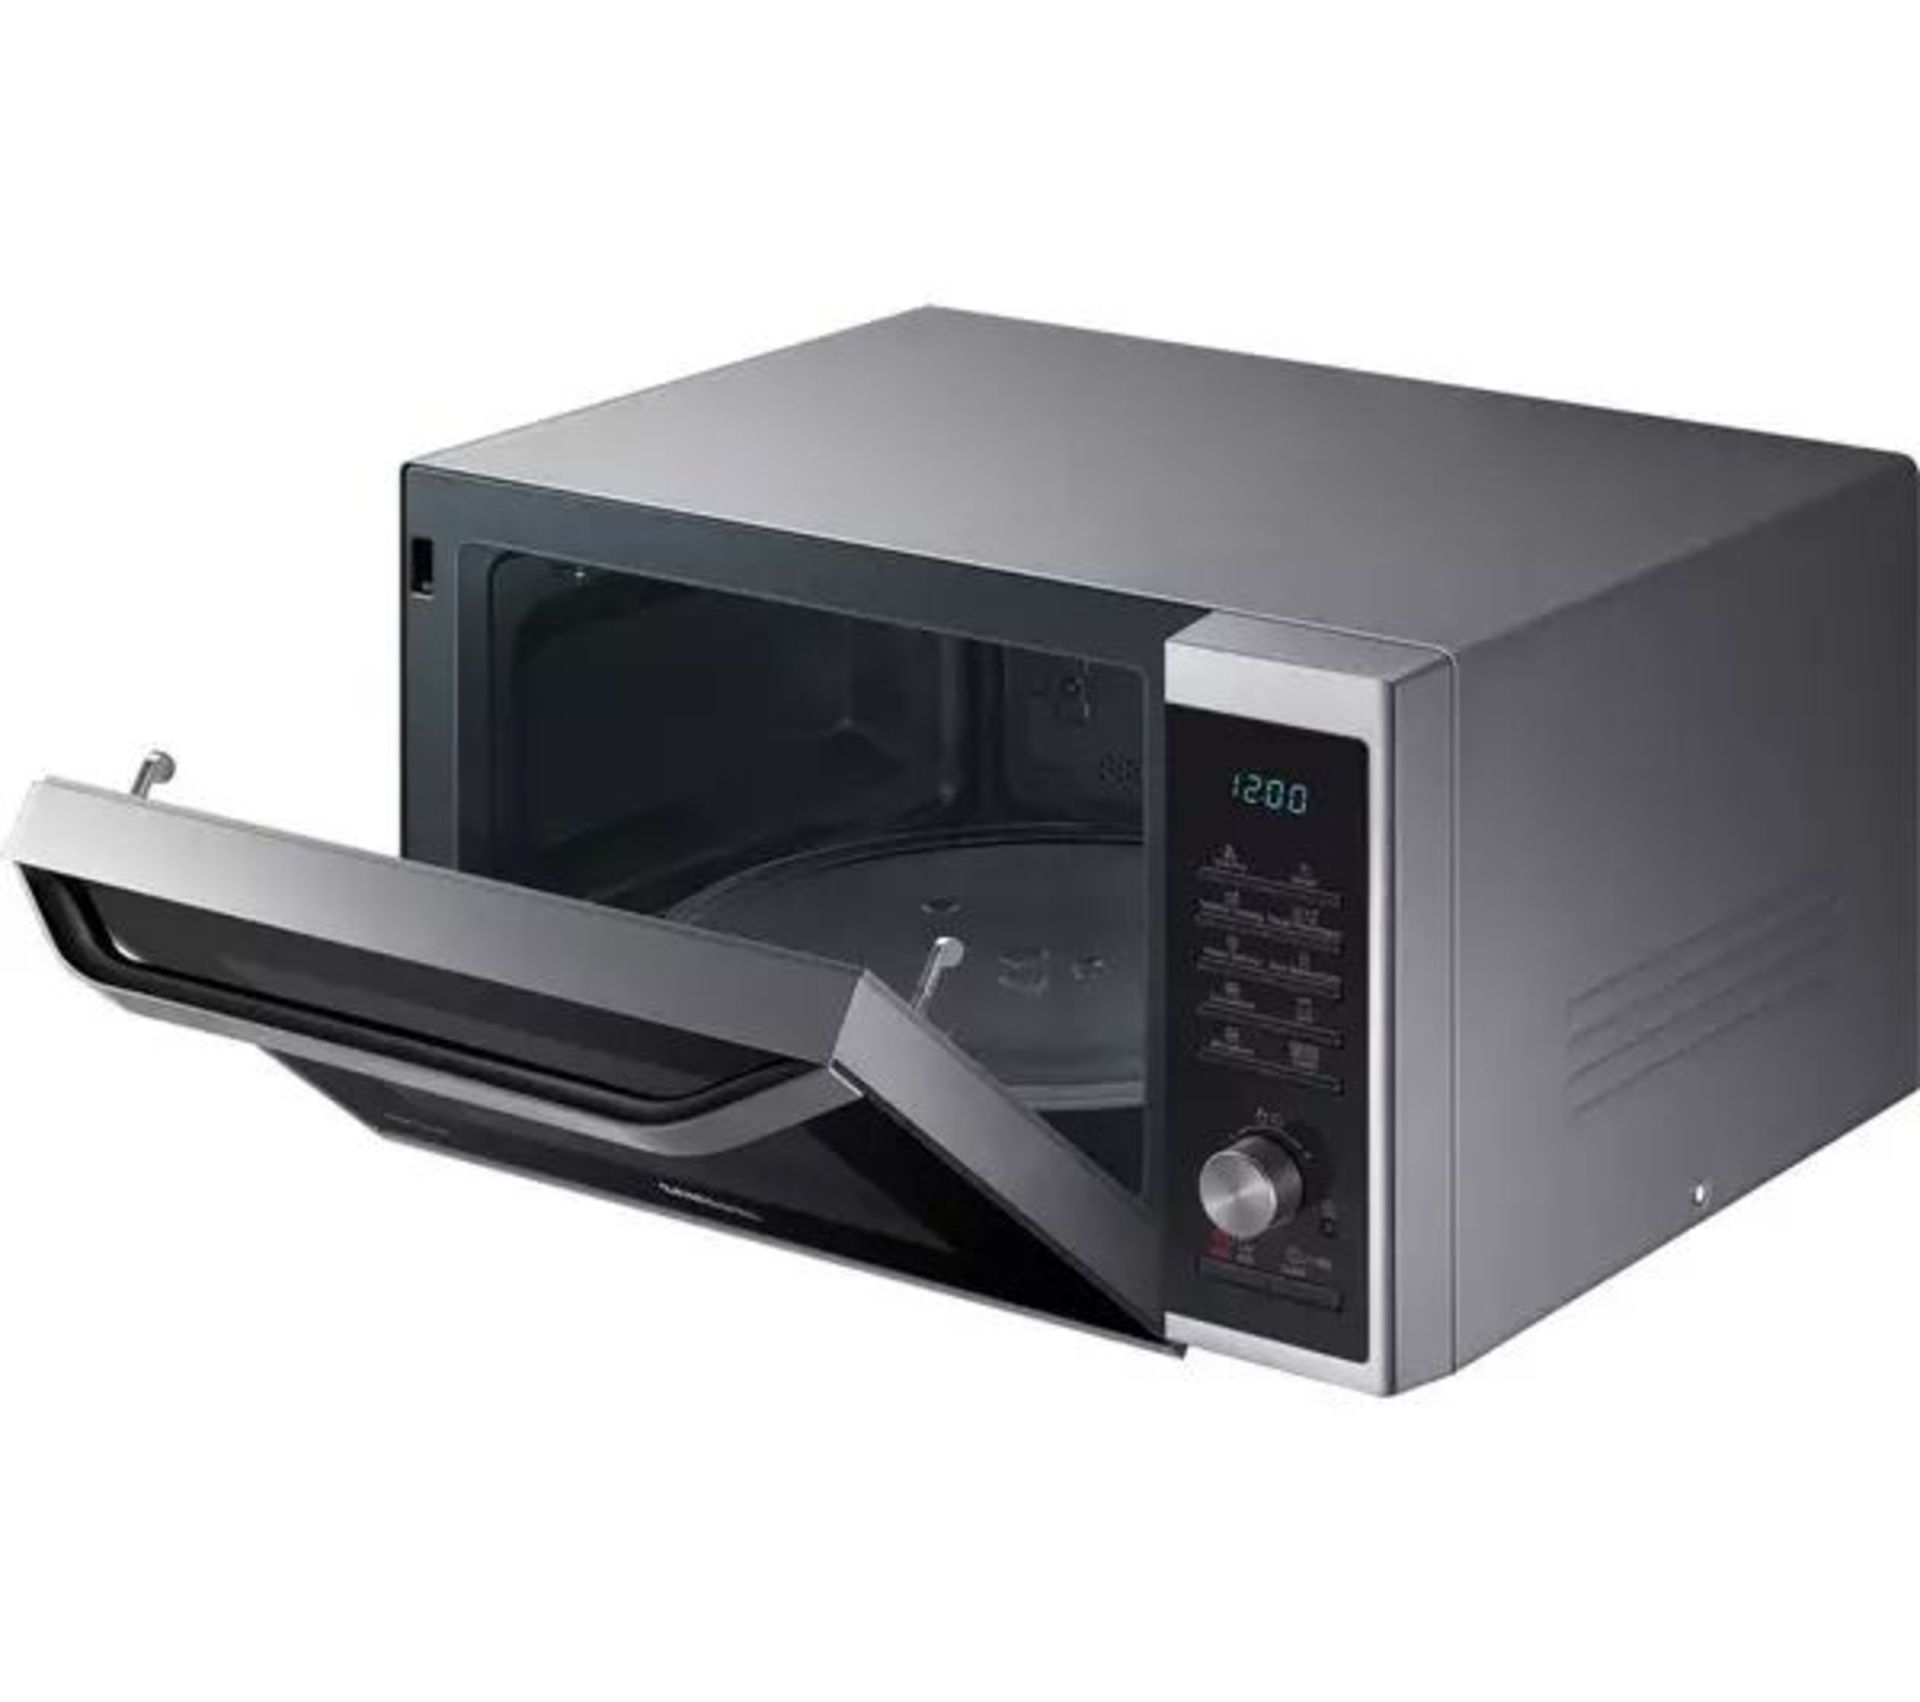 SAMSUNG MC32J7055CT Combination Microwave - Stainless Steel. - BW. RRP £409.00. The wide grill means - Image 2 of 2